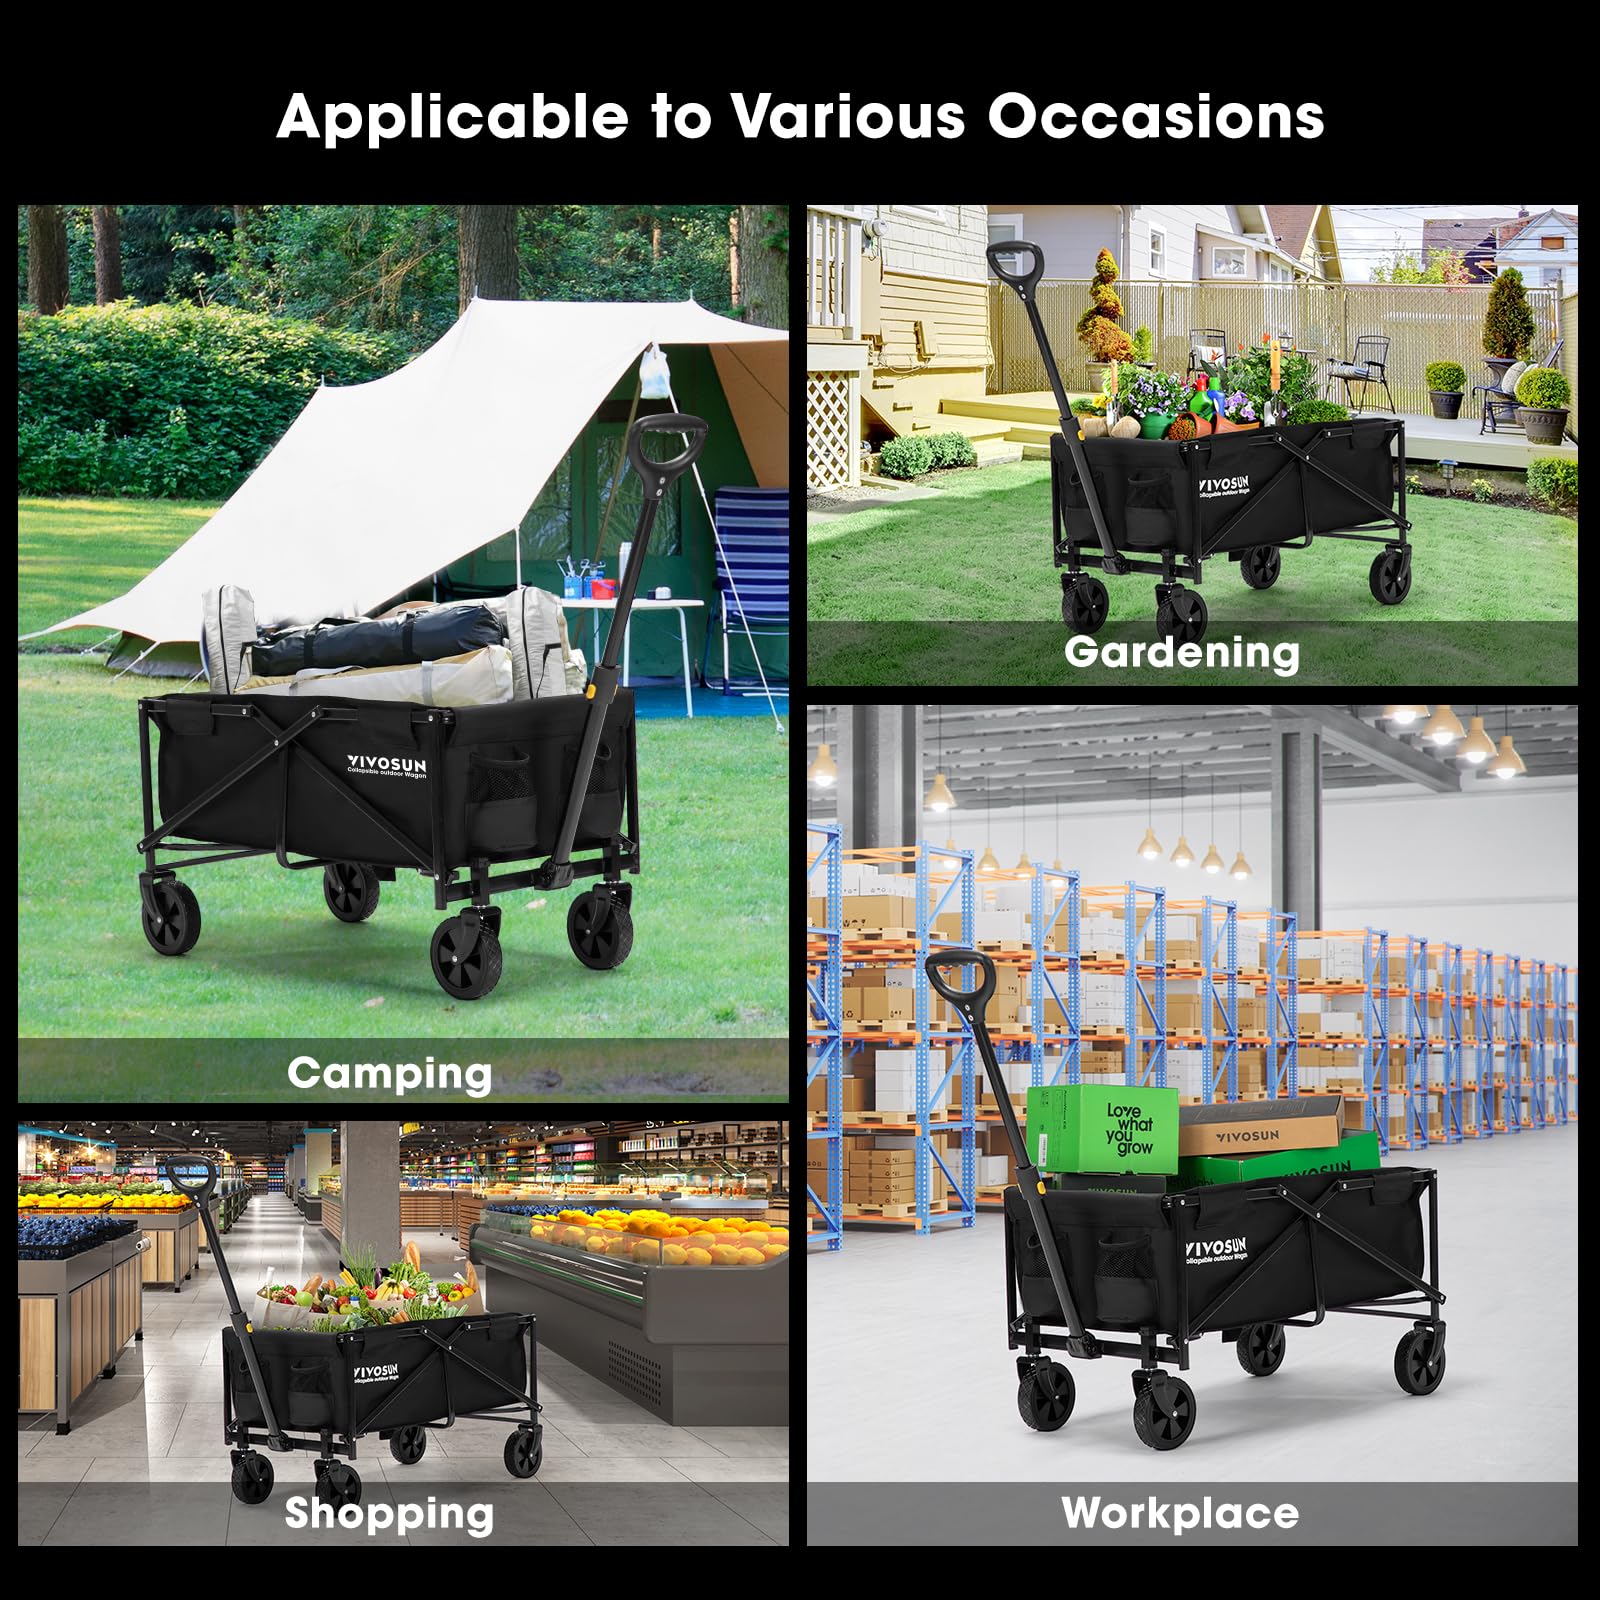 VIVOSUN Collapsible Folding Wagon, Outdoor Utility with All-Terrain Wheels, Adjustable Handle, Cup Holders & Side Pockets, for Camping, Shopping, Garden, 210Lbs Capacity, Black